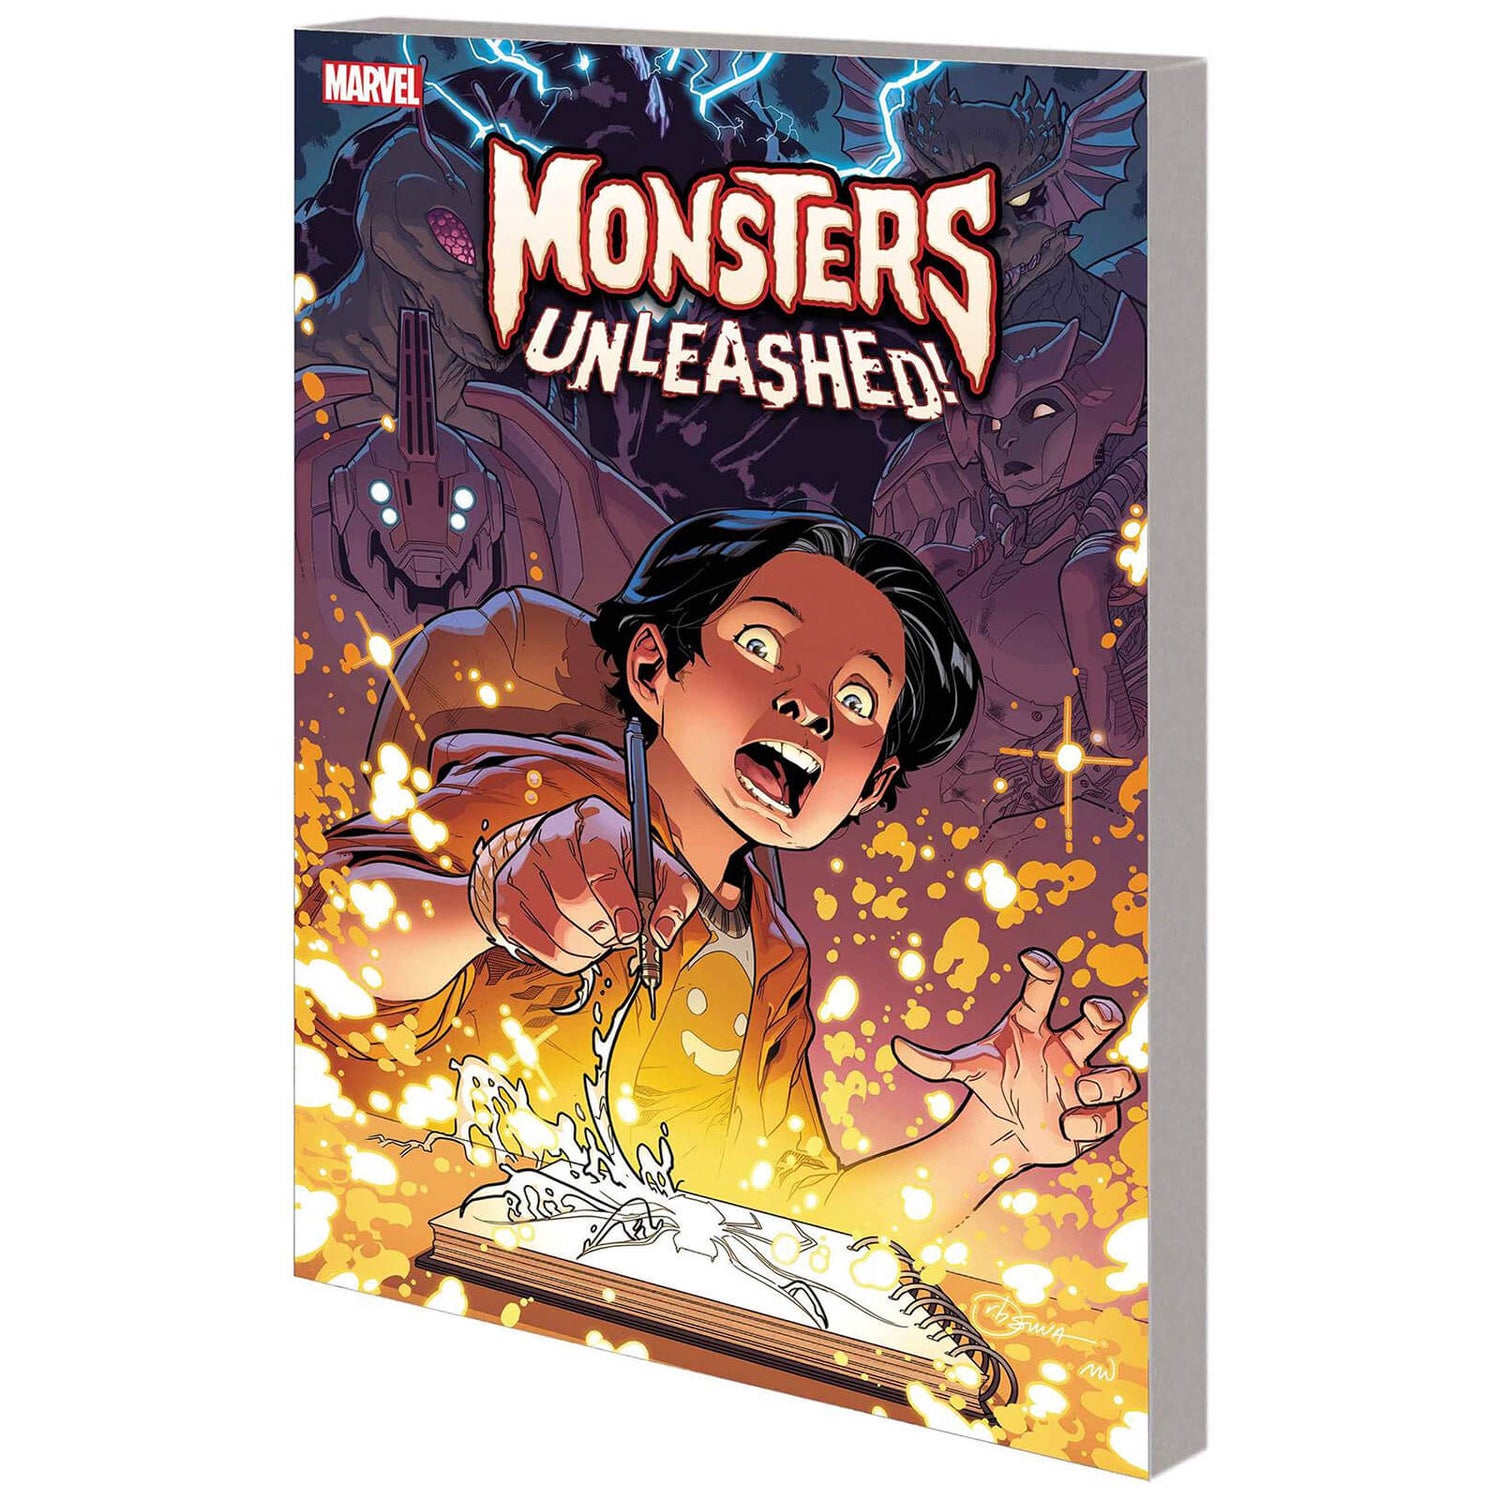 Marvel Comics Monsters Unleashed Trade Paperback Vol 02 Learning Curve Graphic Novel